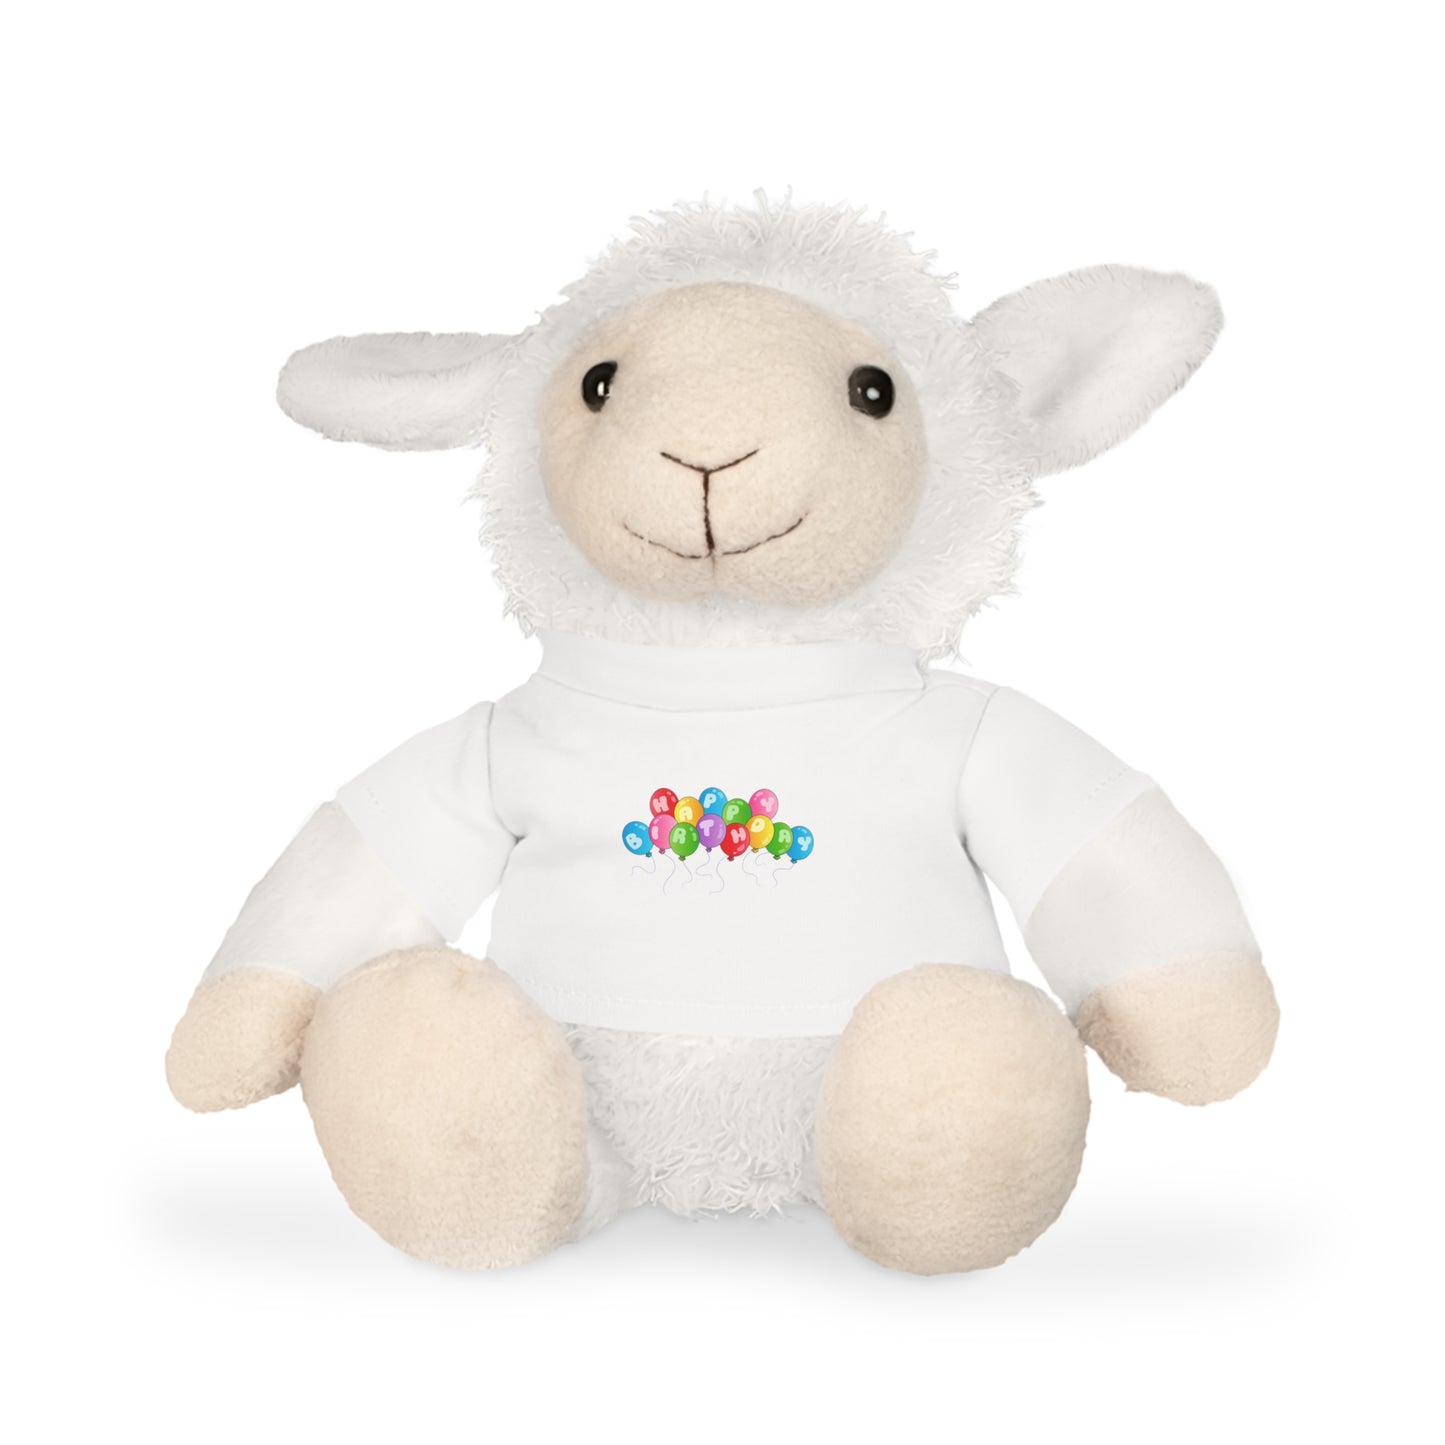 Plush Toy with Happy Birthday T-Shirt, Choose Your Favorite Animal - Bear, Bunny, Elephant, or Sheep